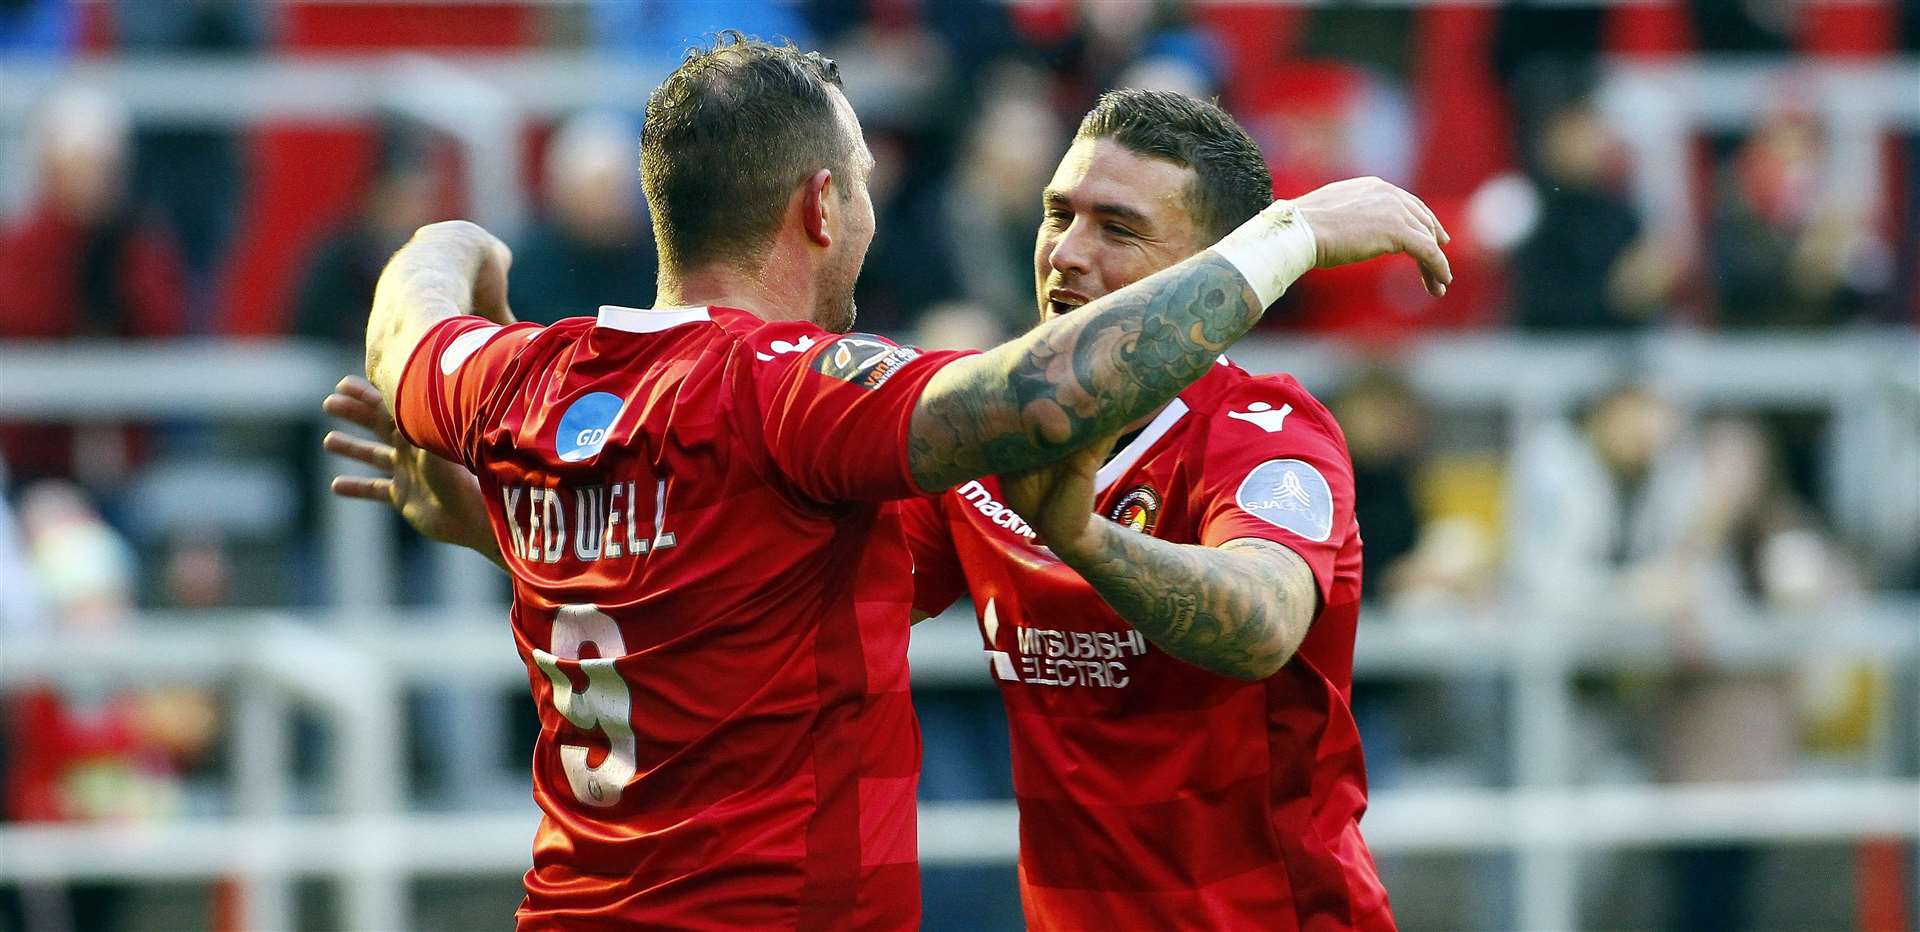 Danny Kedwell and Cody McDonald scored three goals between them on Boxing Day Picture: Sean Aidan